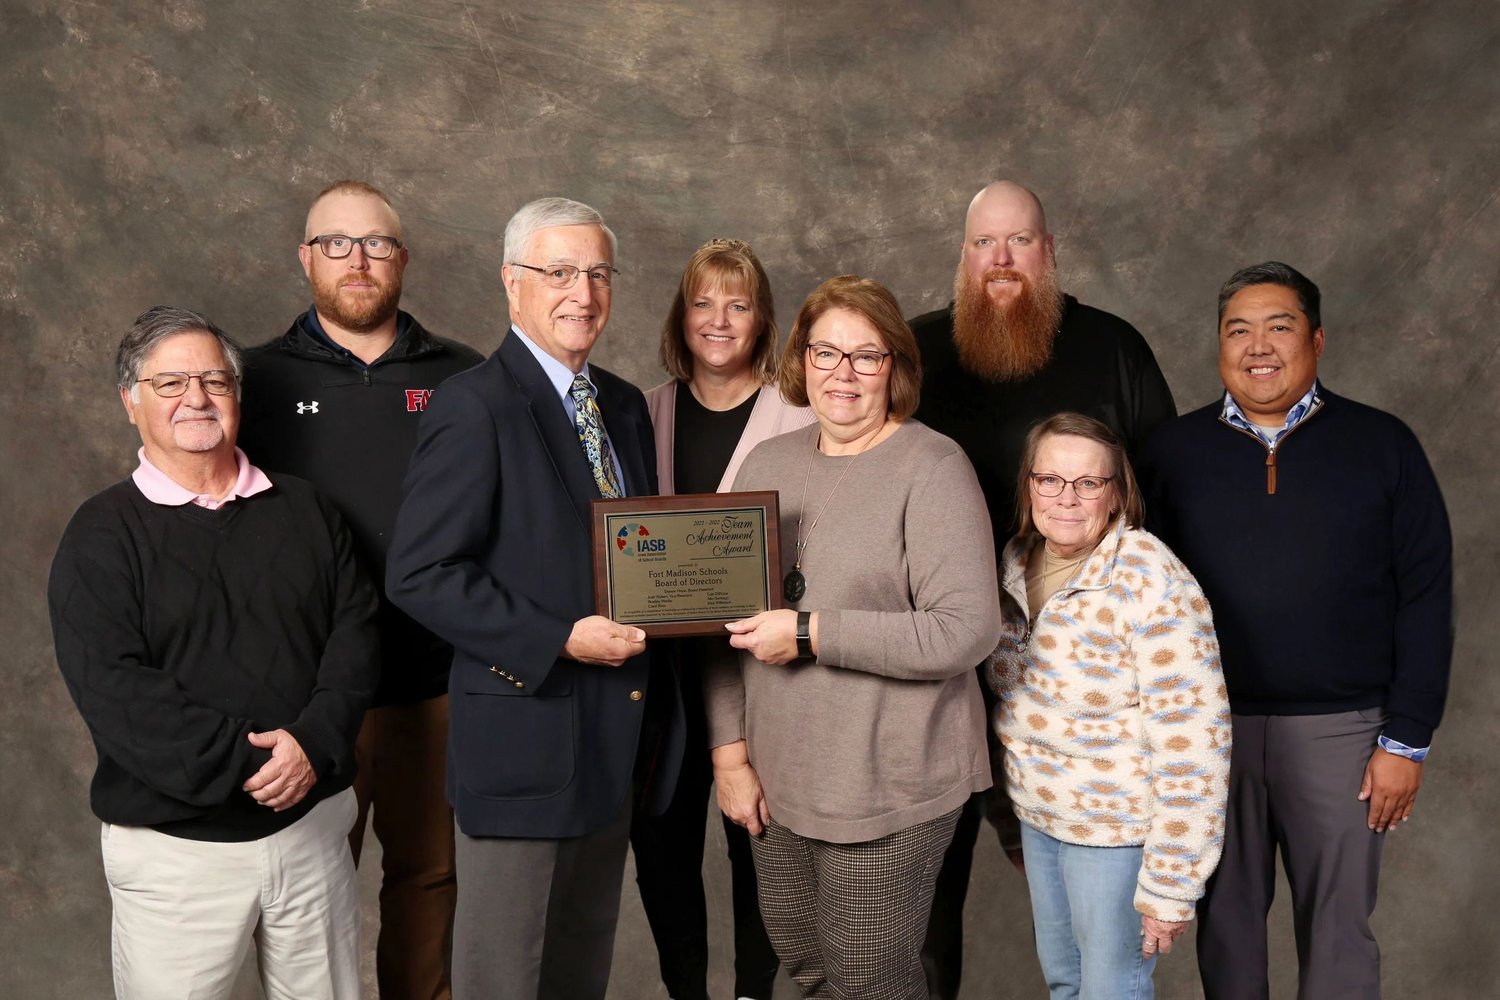 The Fort Madison School Board was honored at the past Iowa Association of School Boards for individual growth and learning.